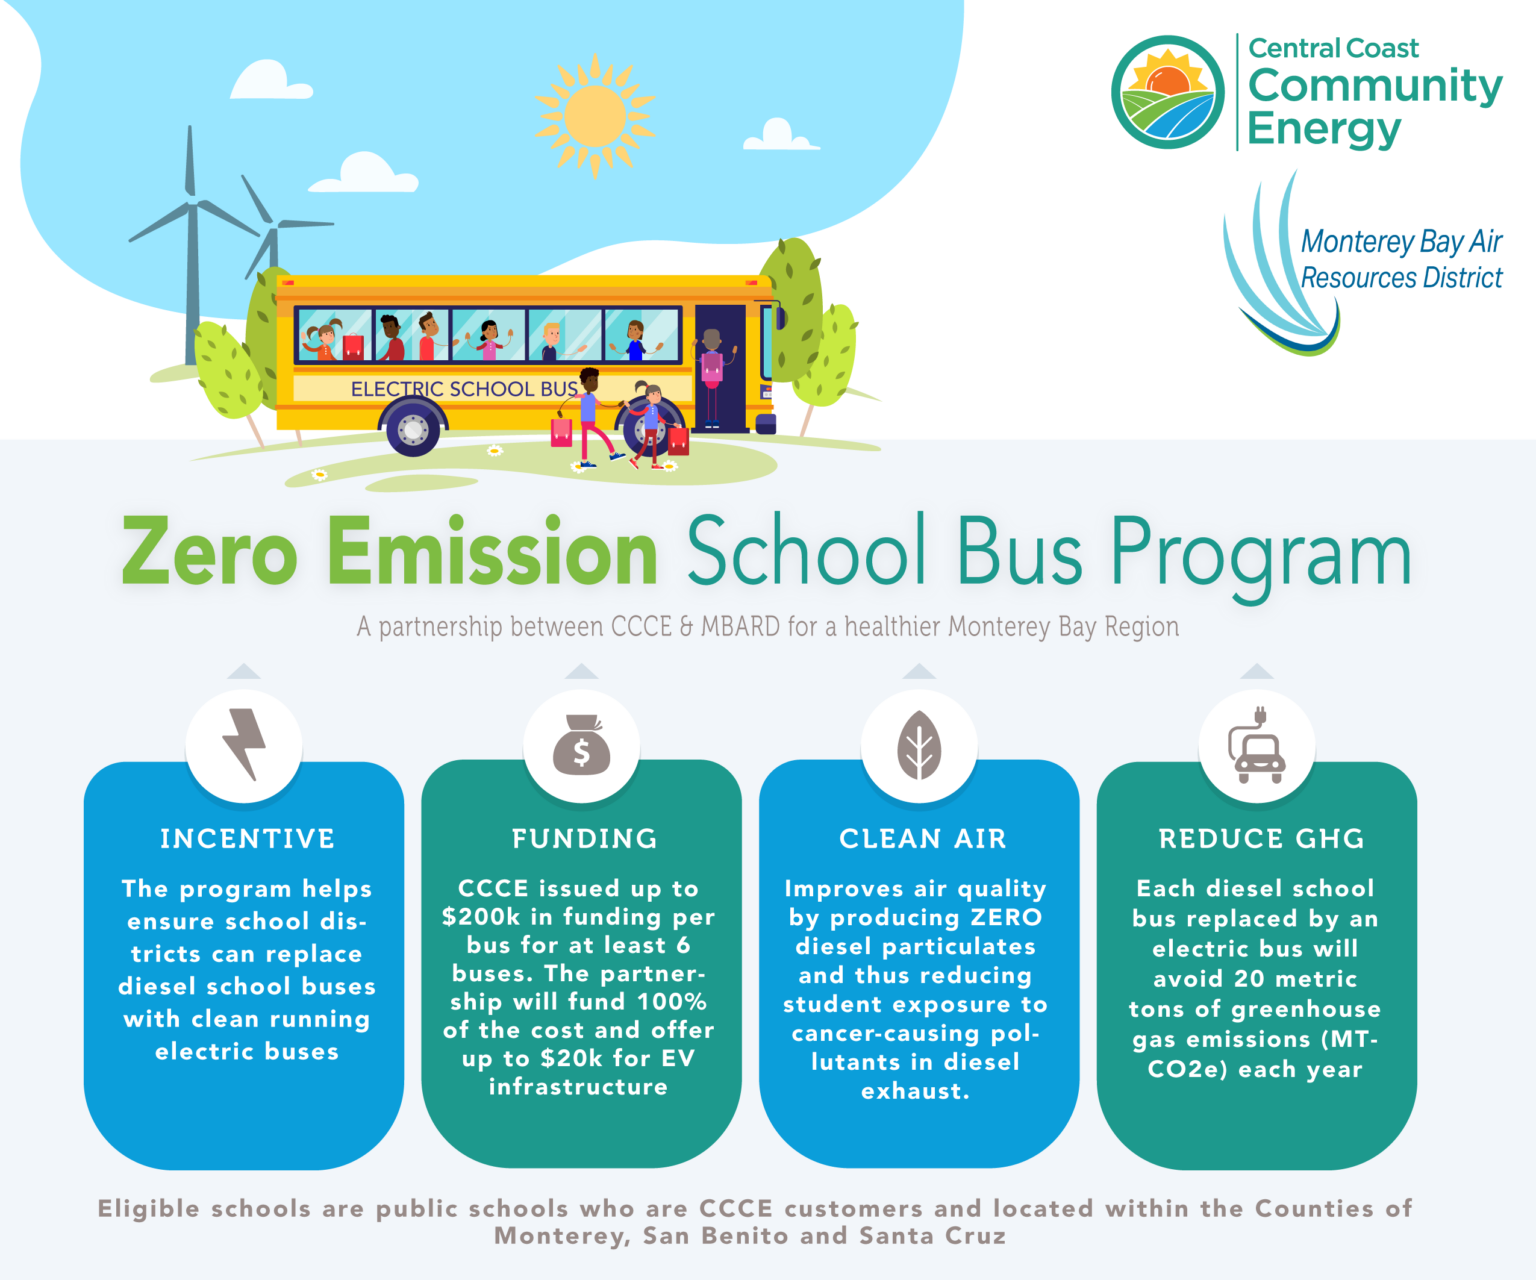 Electric School Bus Incentives Now Available Through MBCP & MBARD Partnership